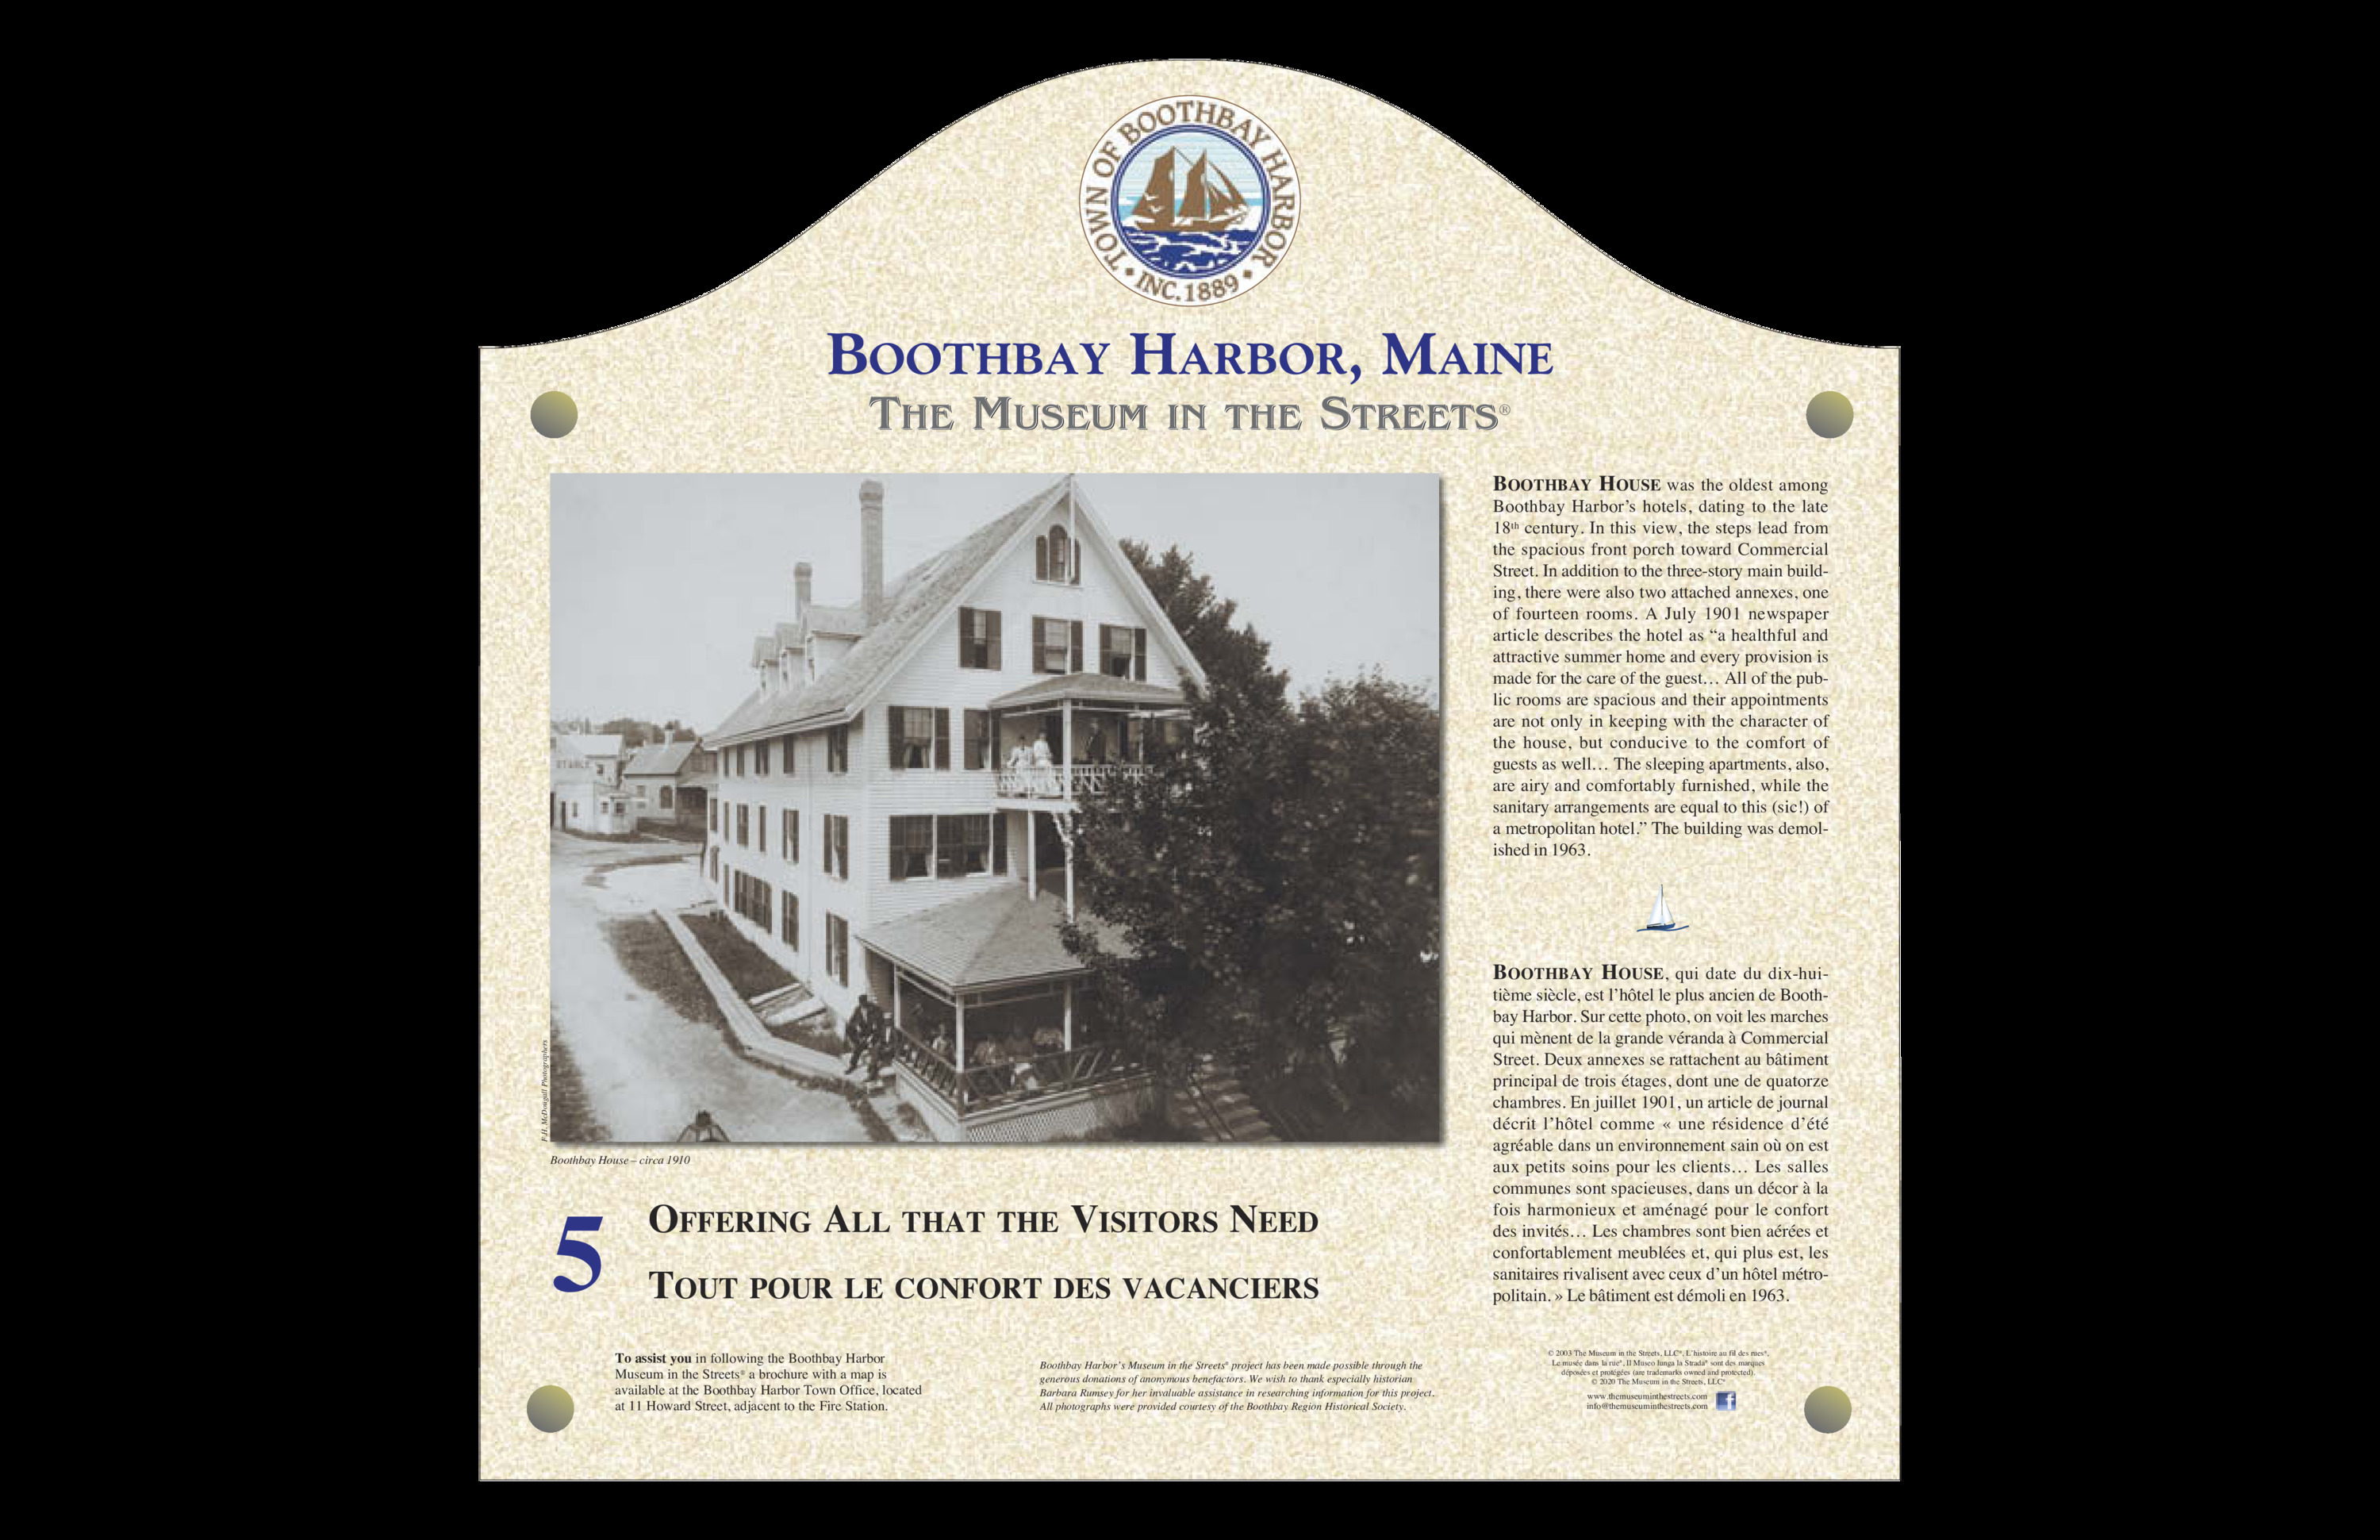 Boothbay Harbor Museum in the Streets